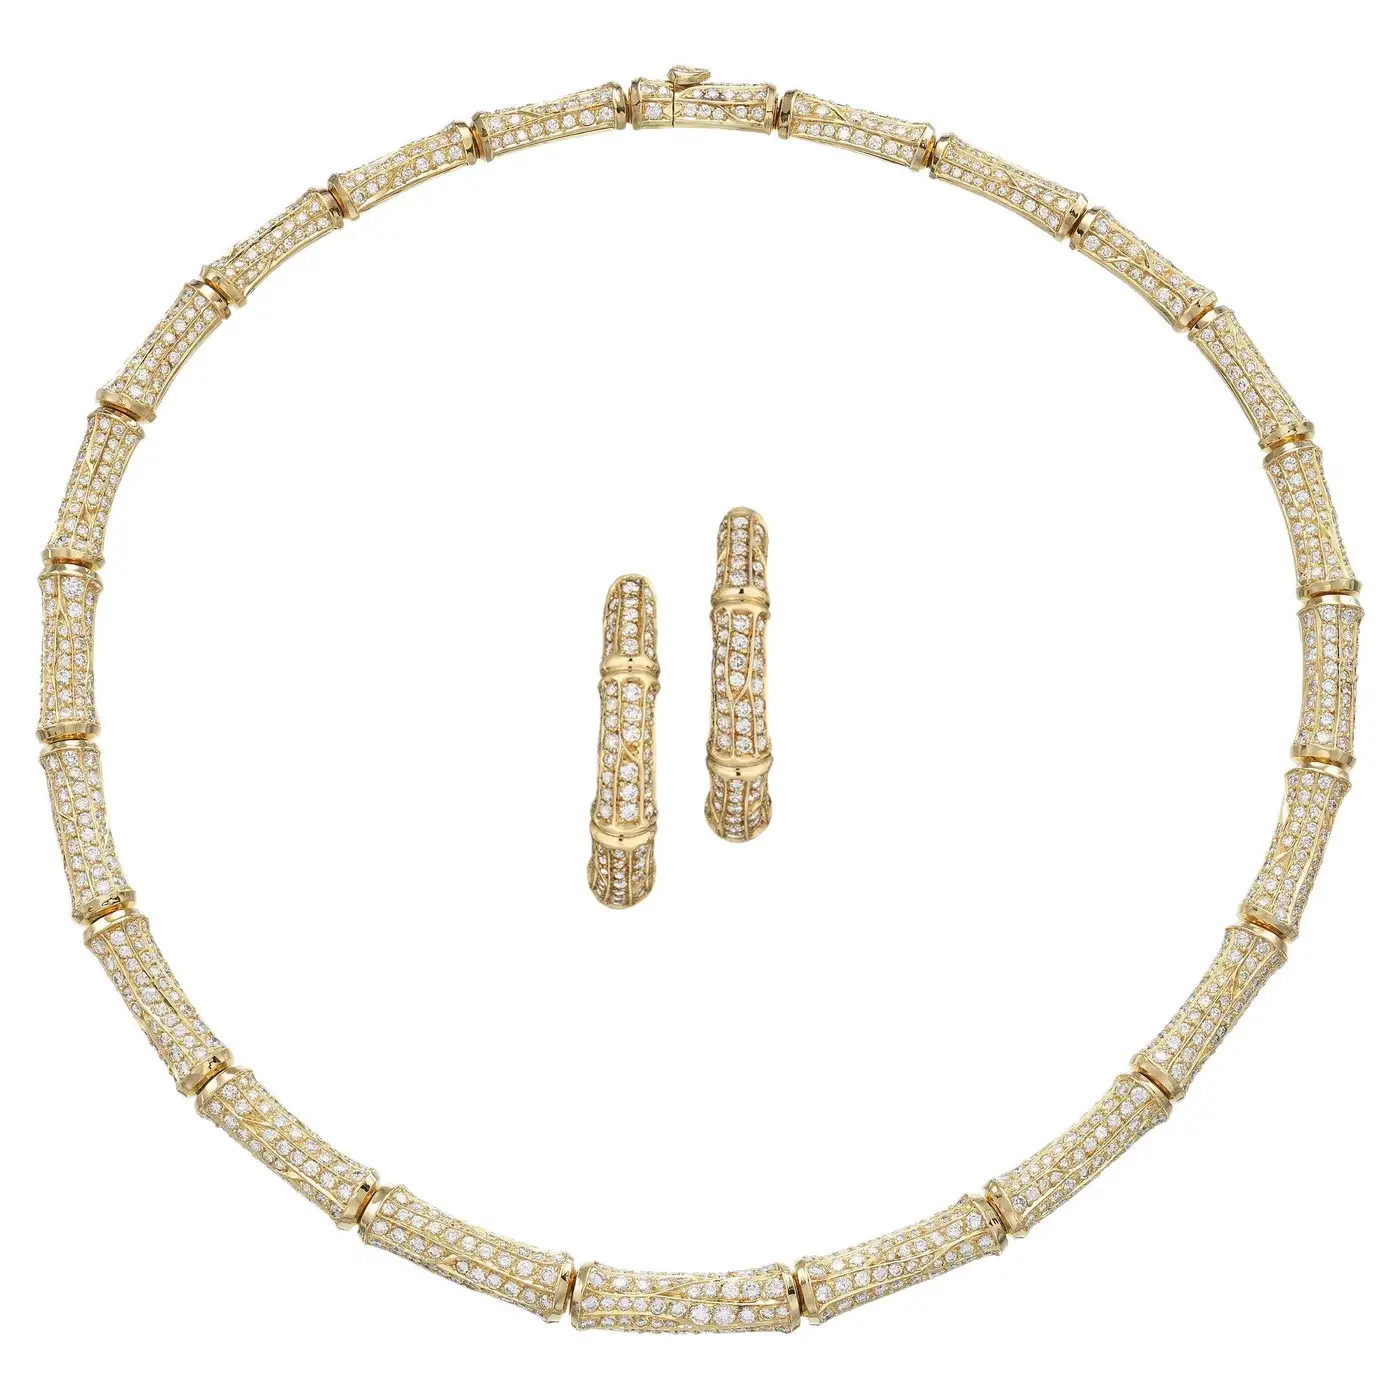 Cartier-26cts-Diamond-Bamboo-Suite-in-18K-Gold-Necklace-and-Earrings-1.webp